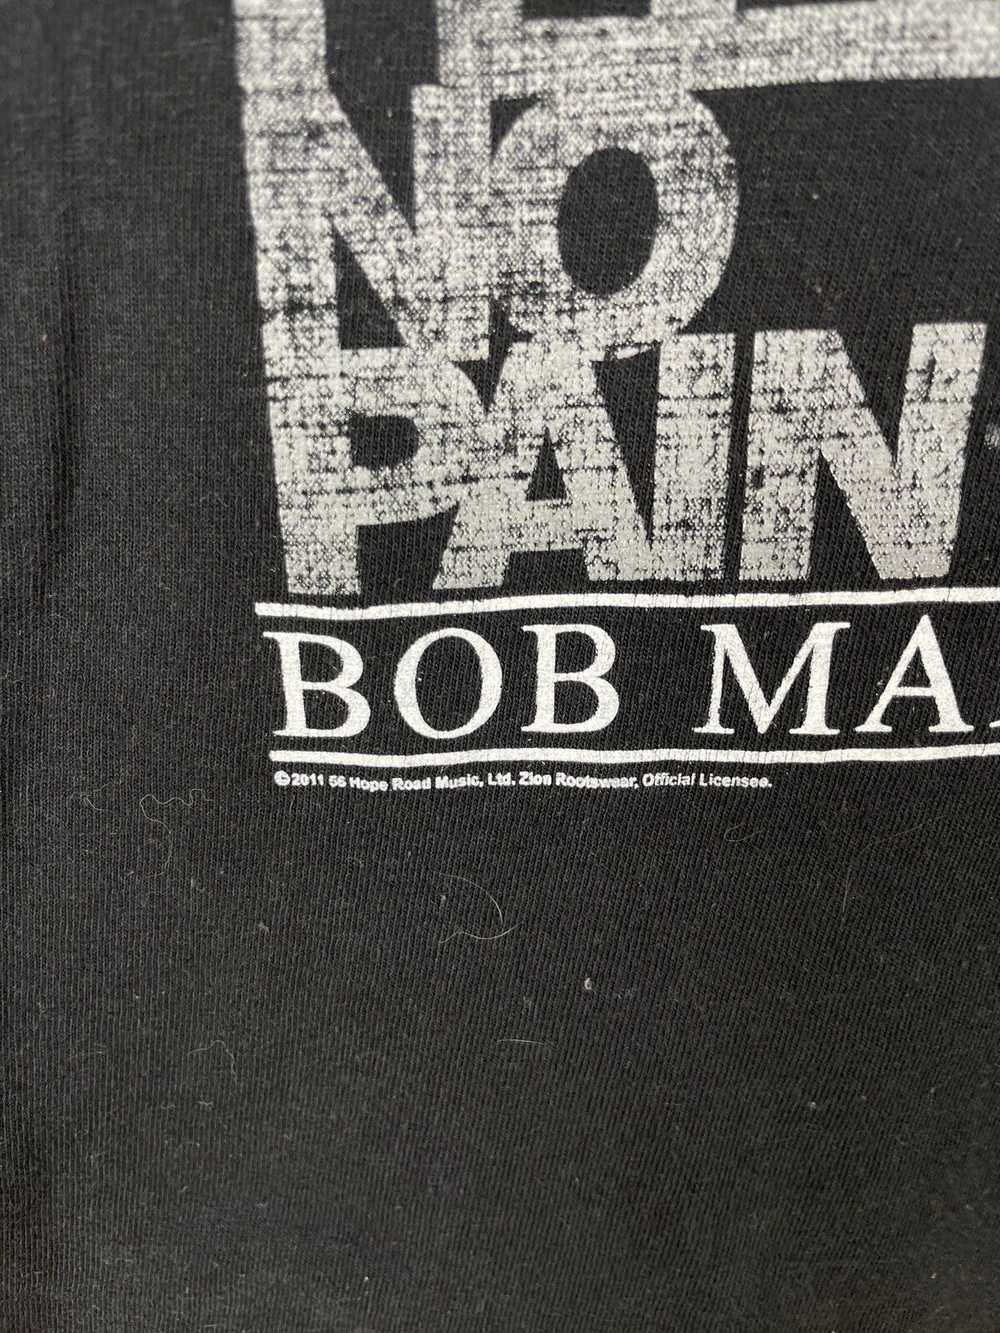 Band Tees × Bob Marley × Zion Rootswear Zion Root… - image 4